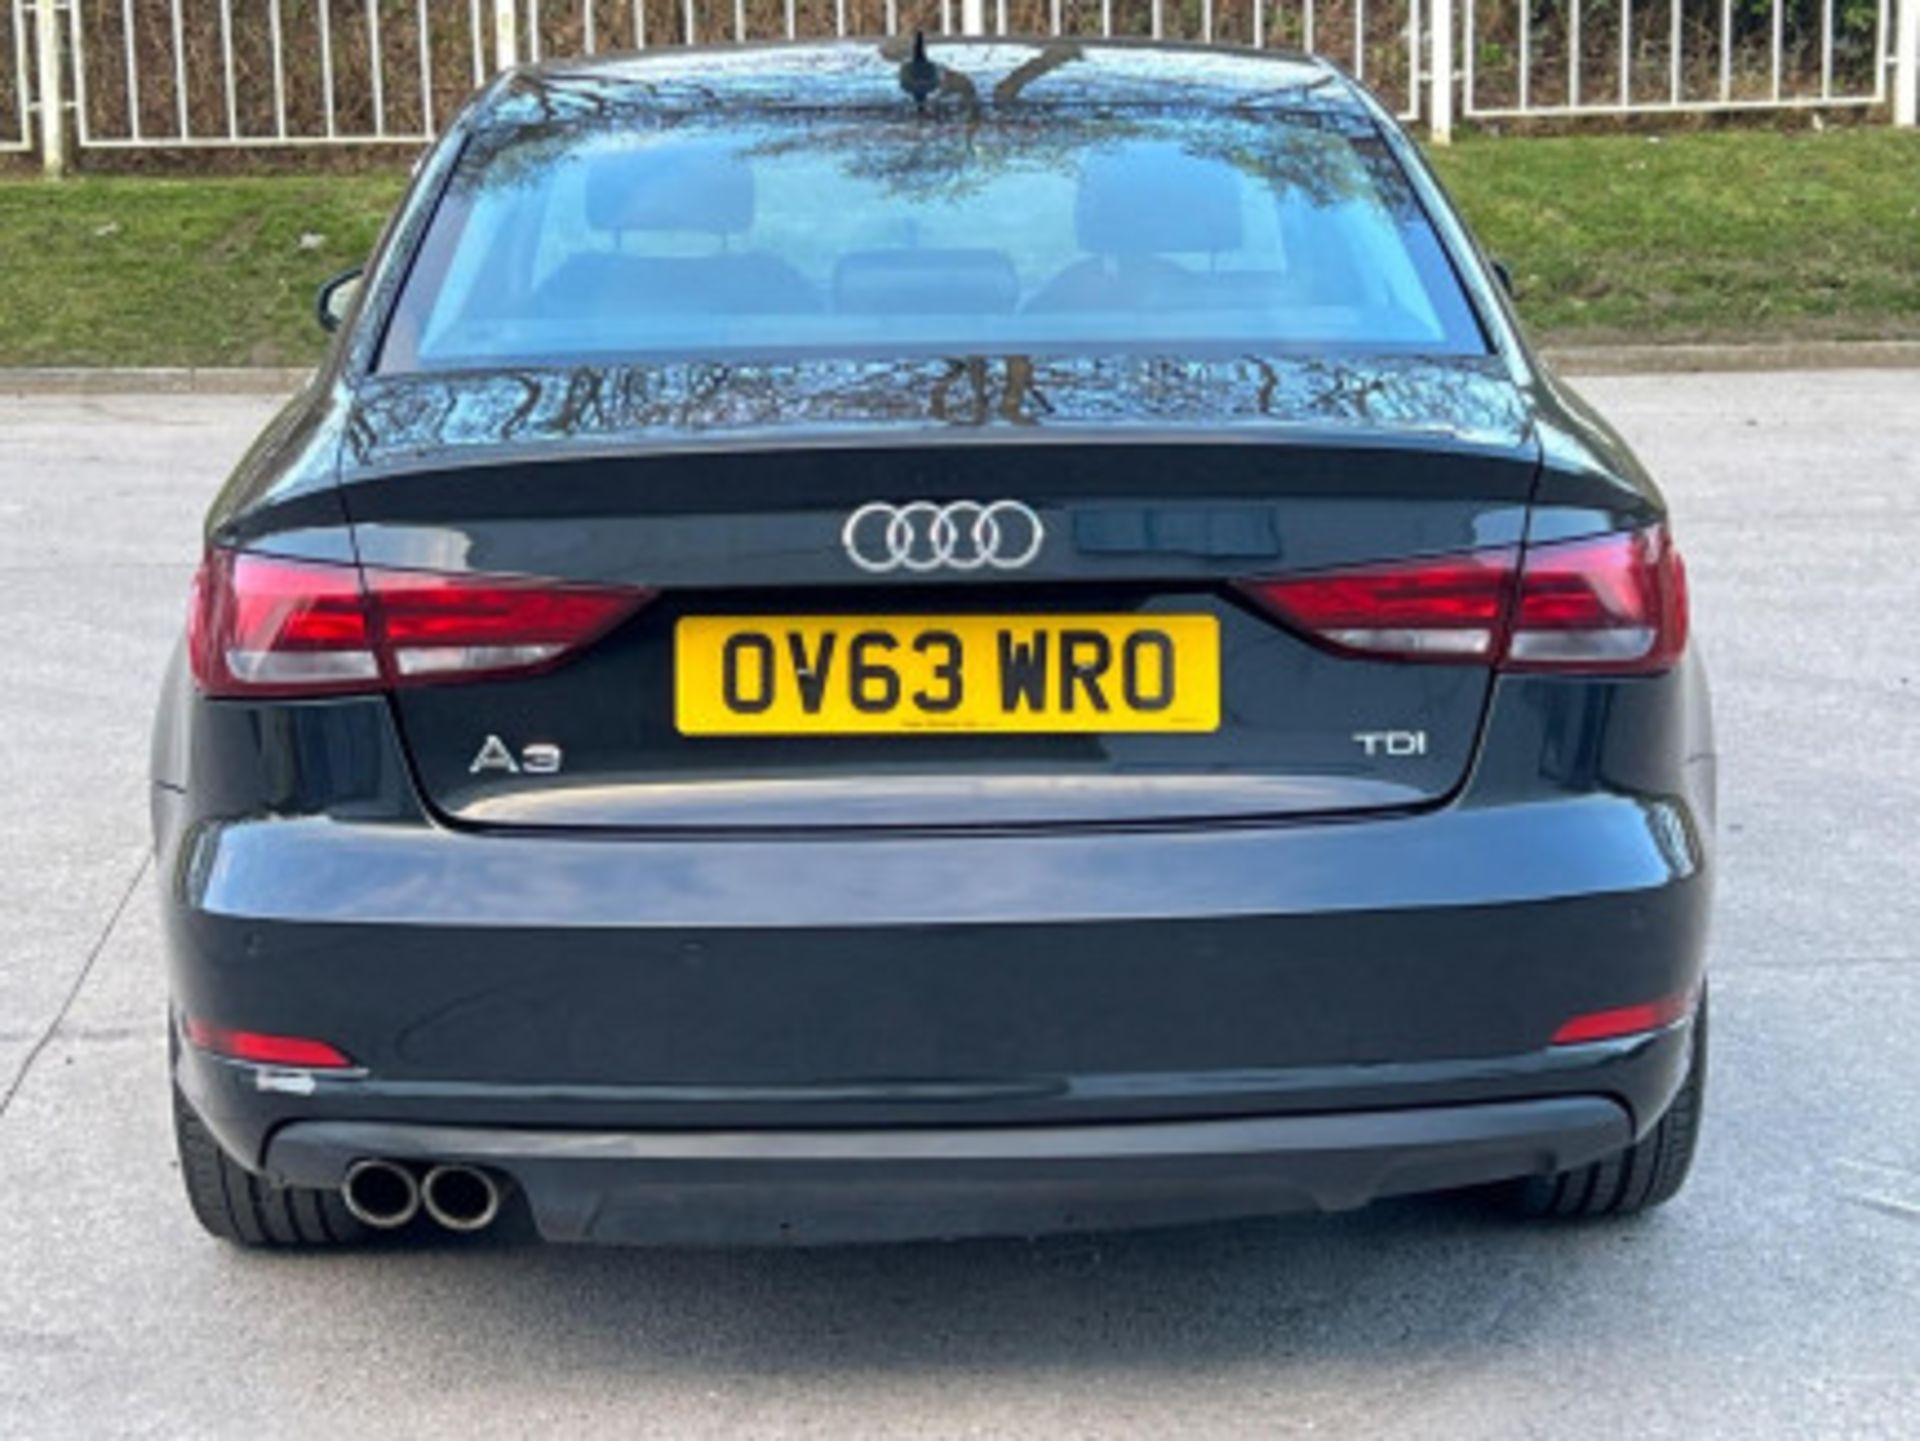 AUDI A3 2.0TDI SPORTBACK - STYLE, PERFORMANCE, AND COMFORT COMBINED >>--NO VAT ON HAMMER--<< - Image 101 of 216